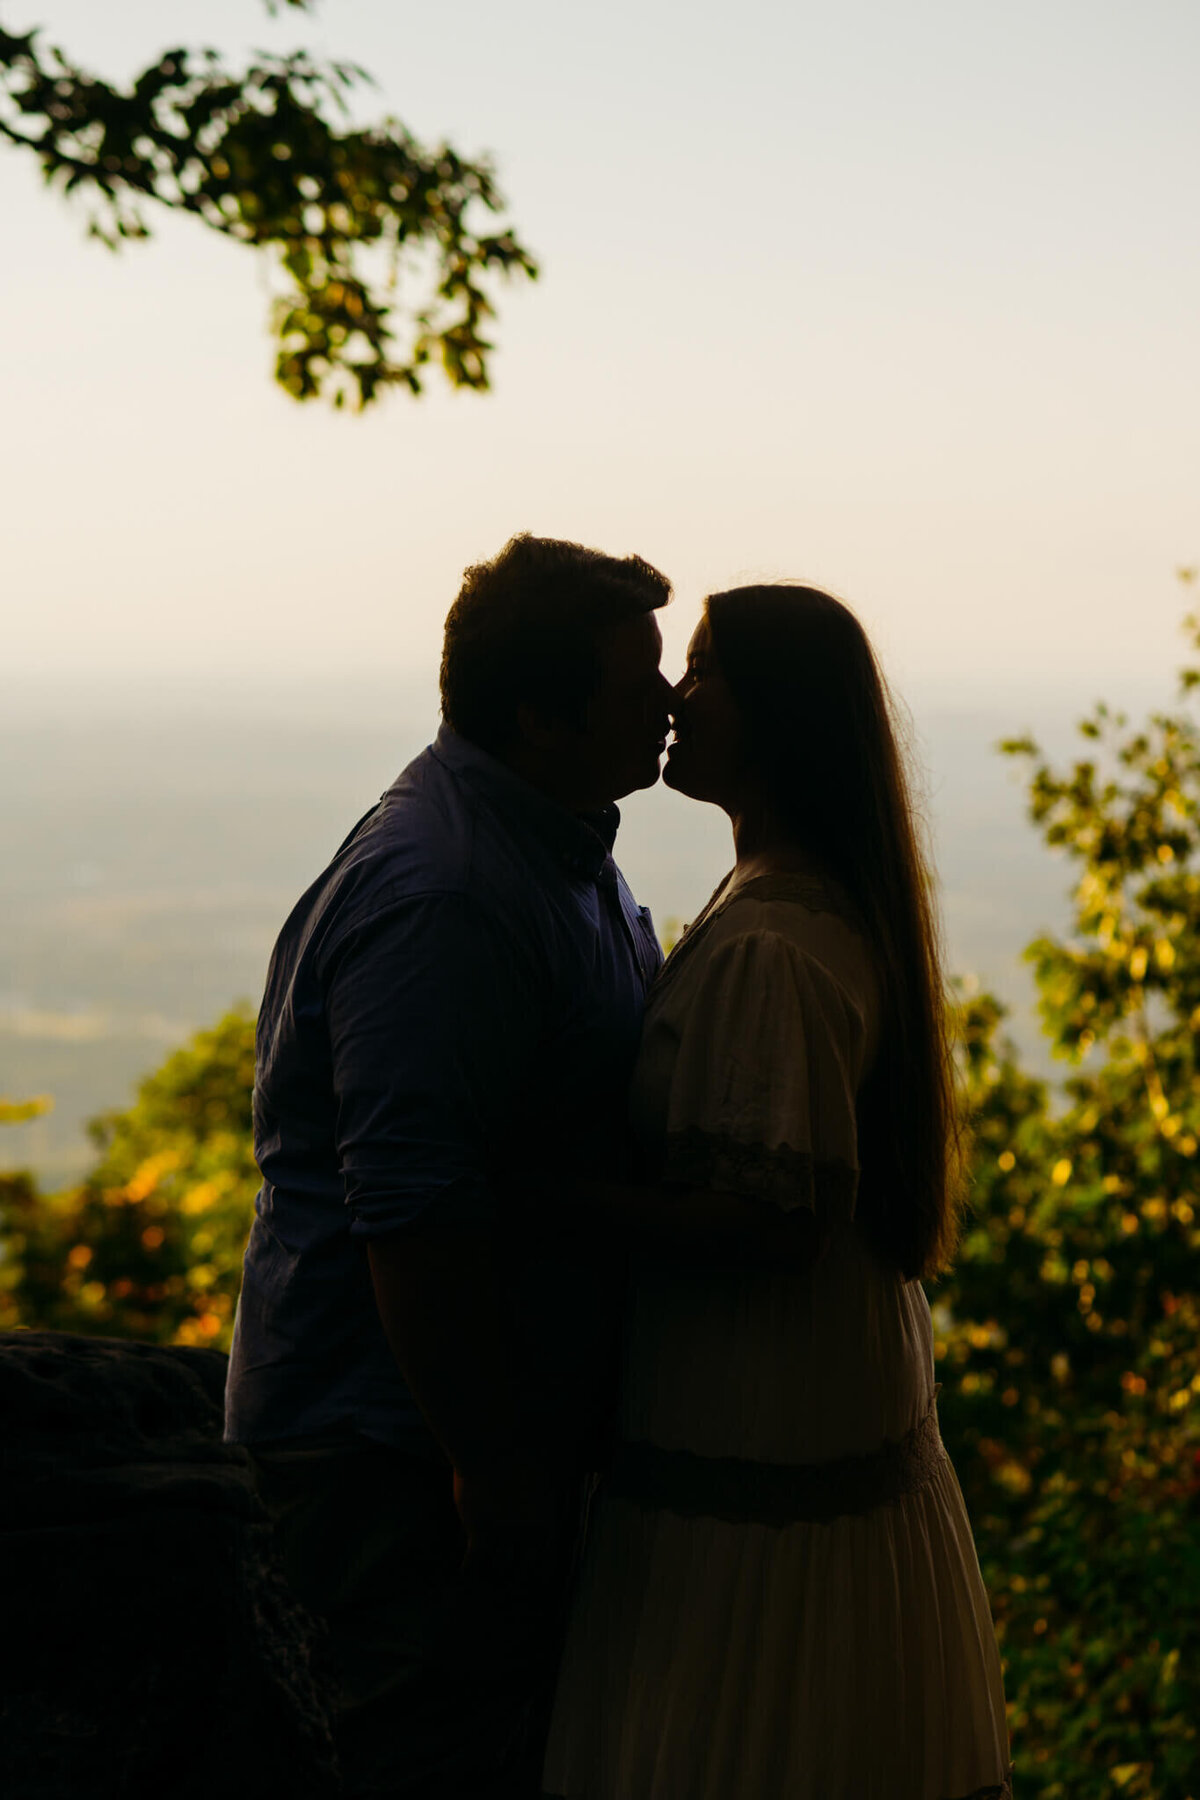 photo of silhouette of a man and woman kissing with mountains in the background